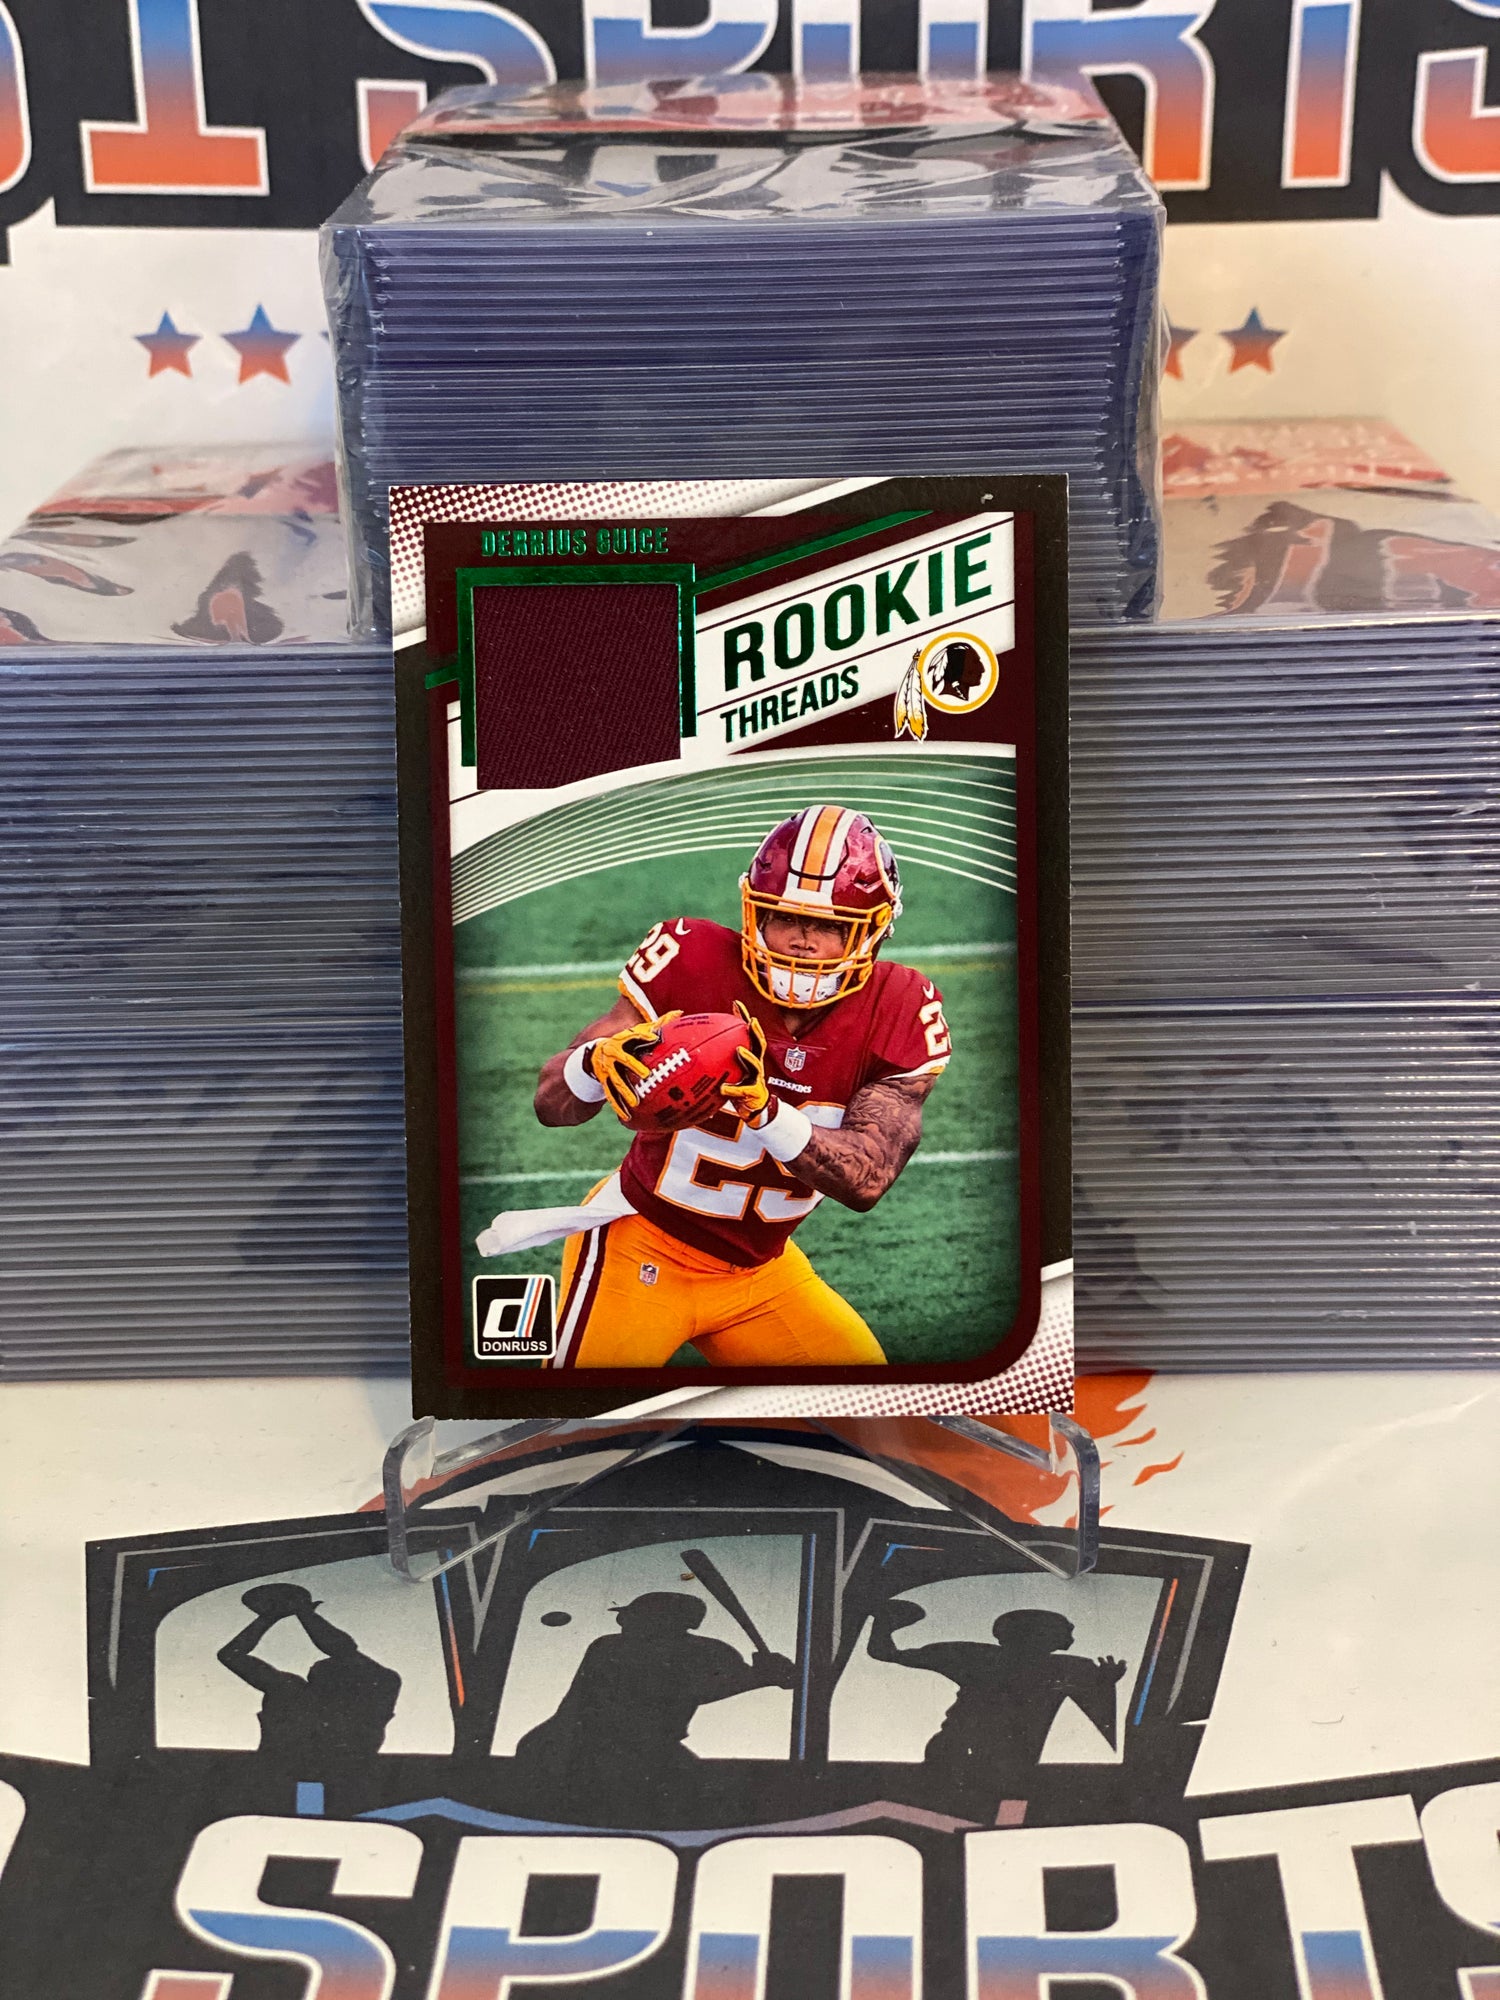 2018 Donruss (Green, Rookie Threads Relic) Derrius Guice #7